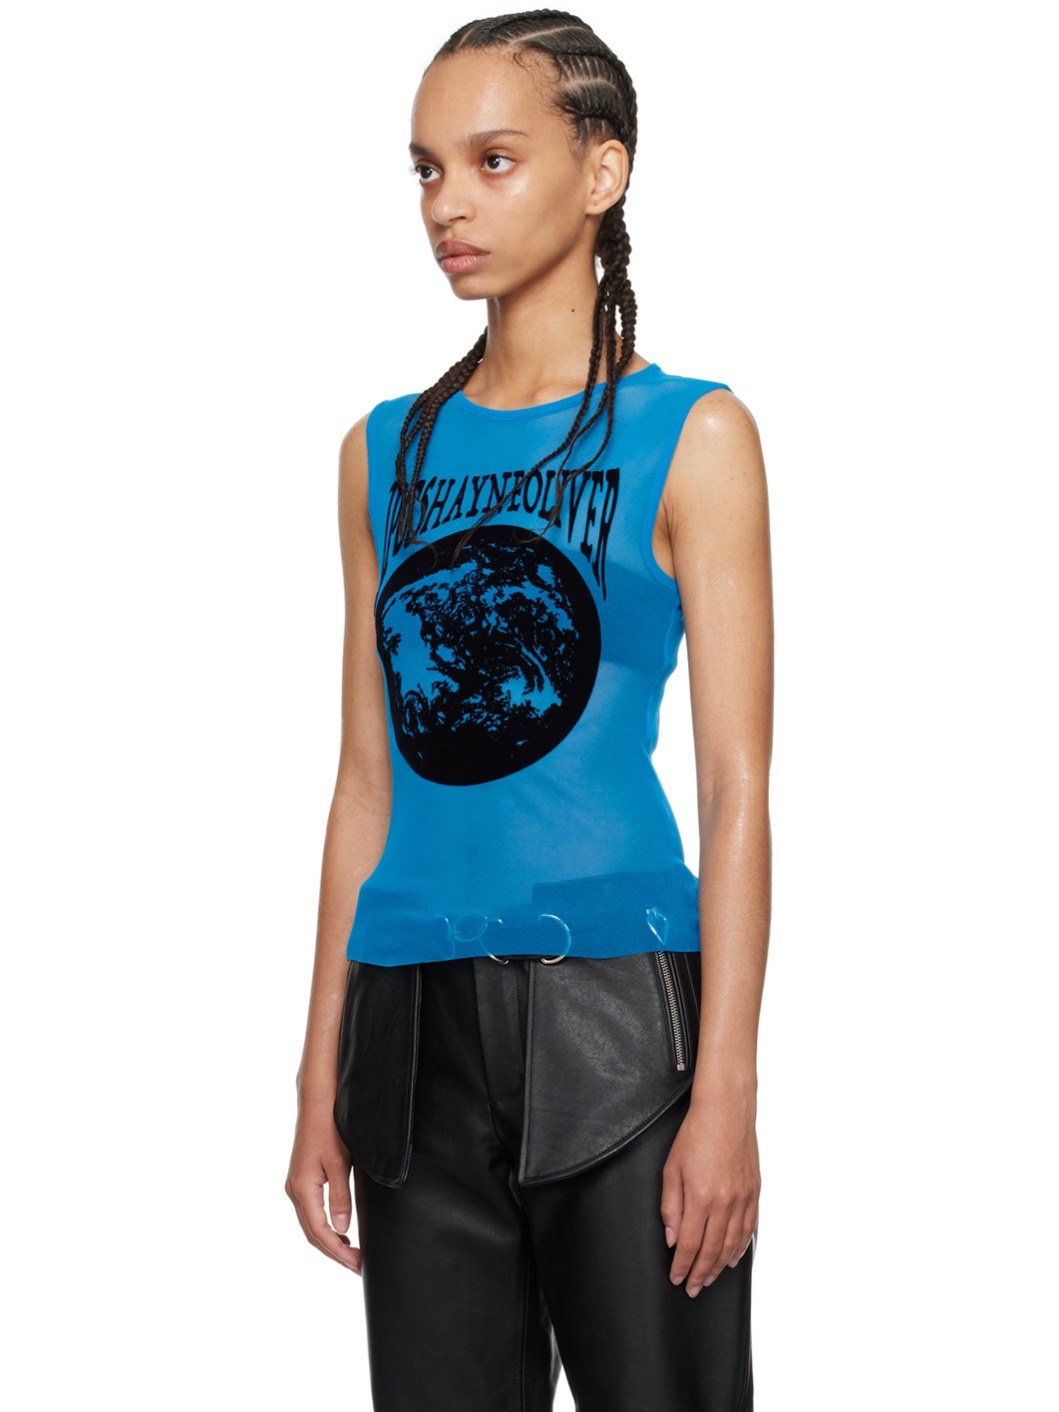 Blue Shayne Oliver Edition Earth Tank Top - 4